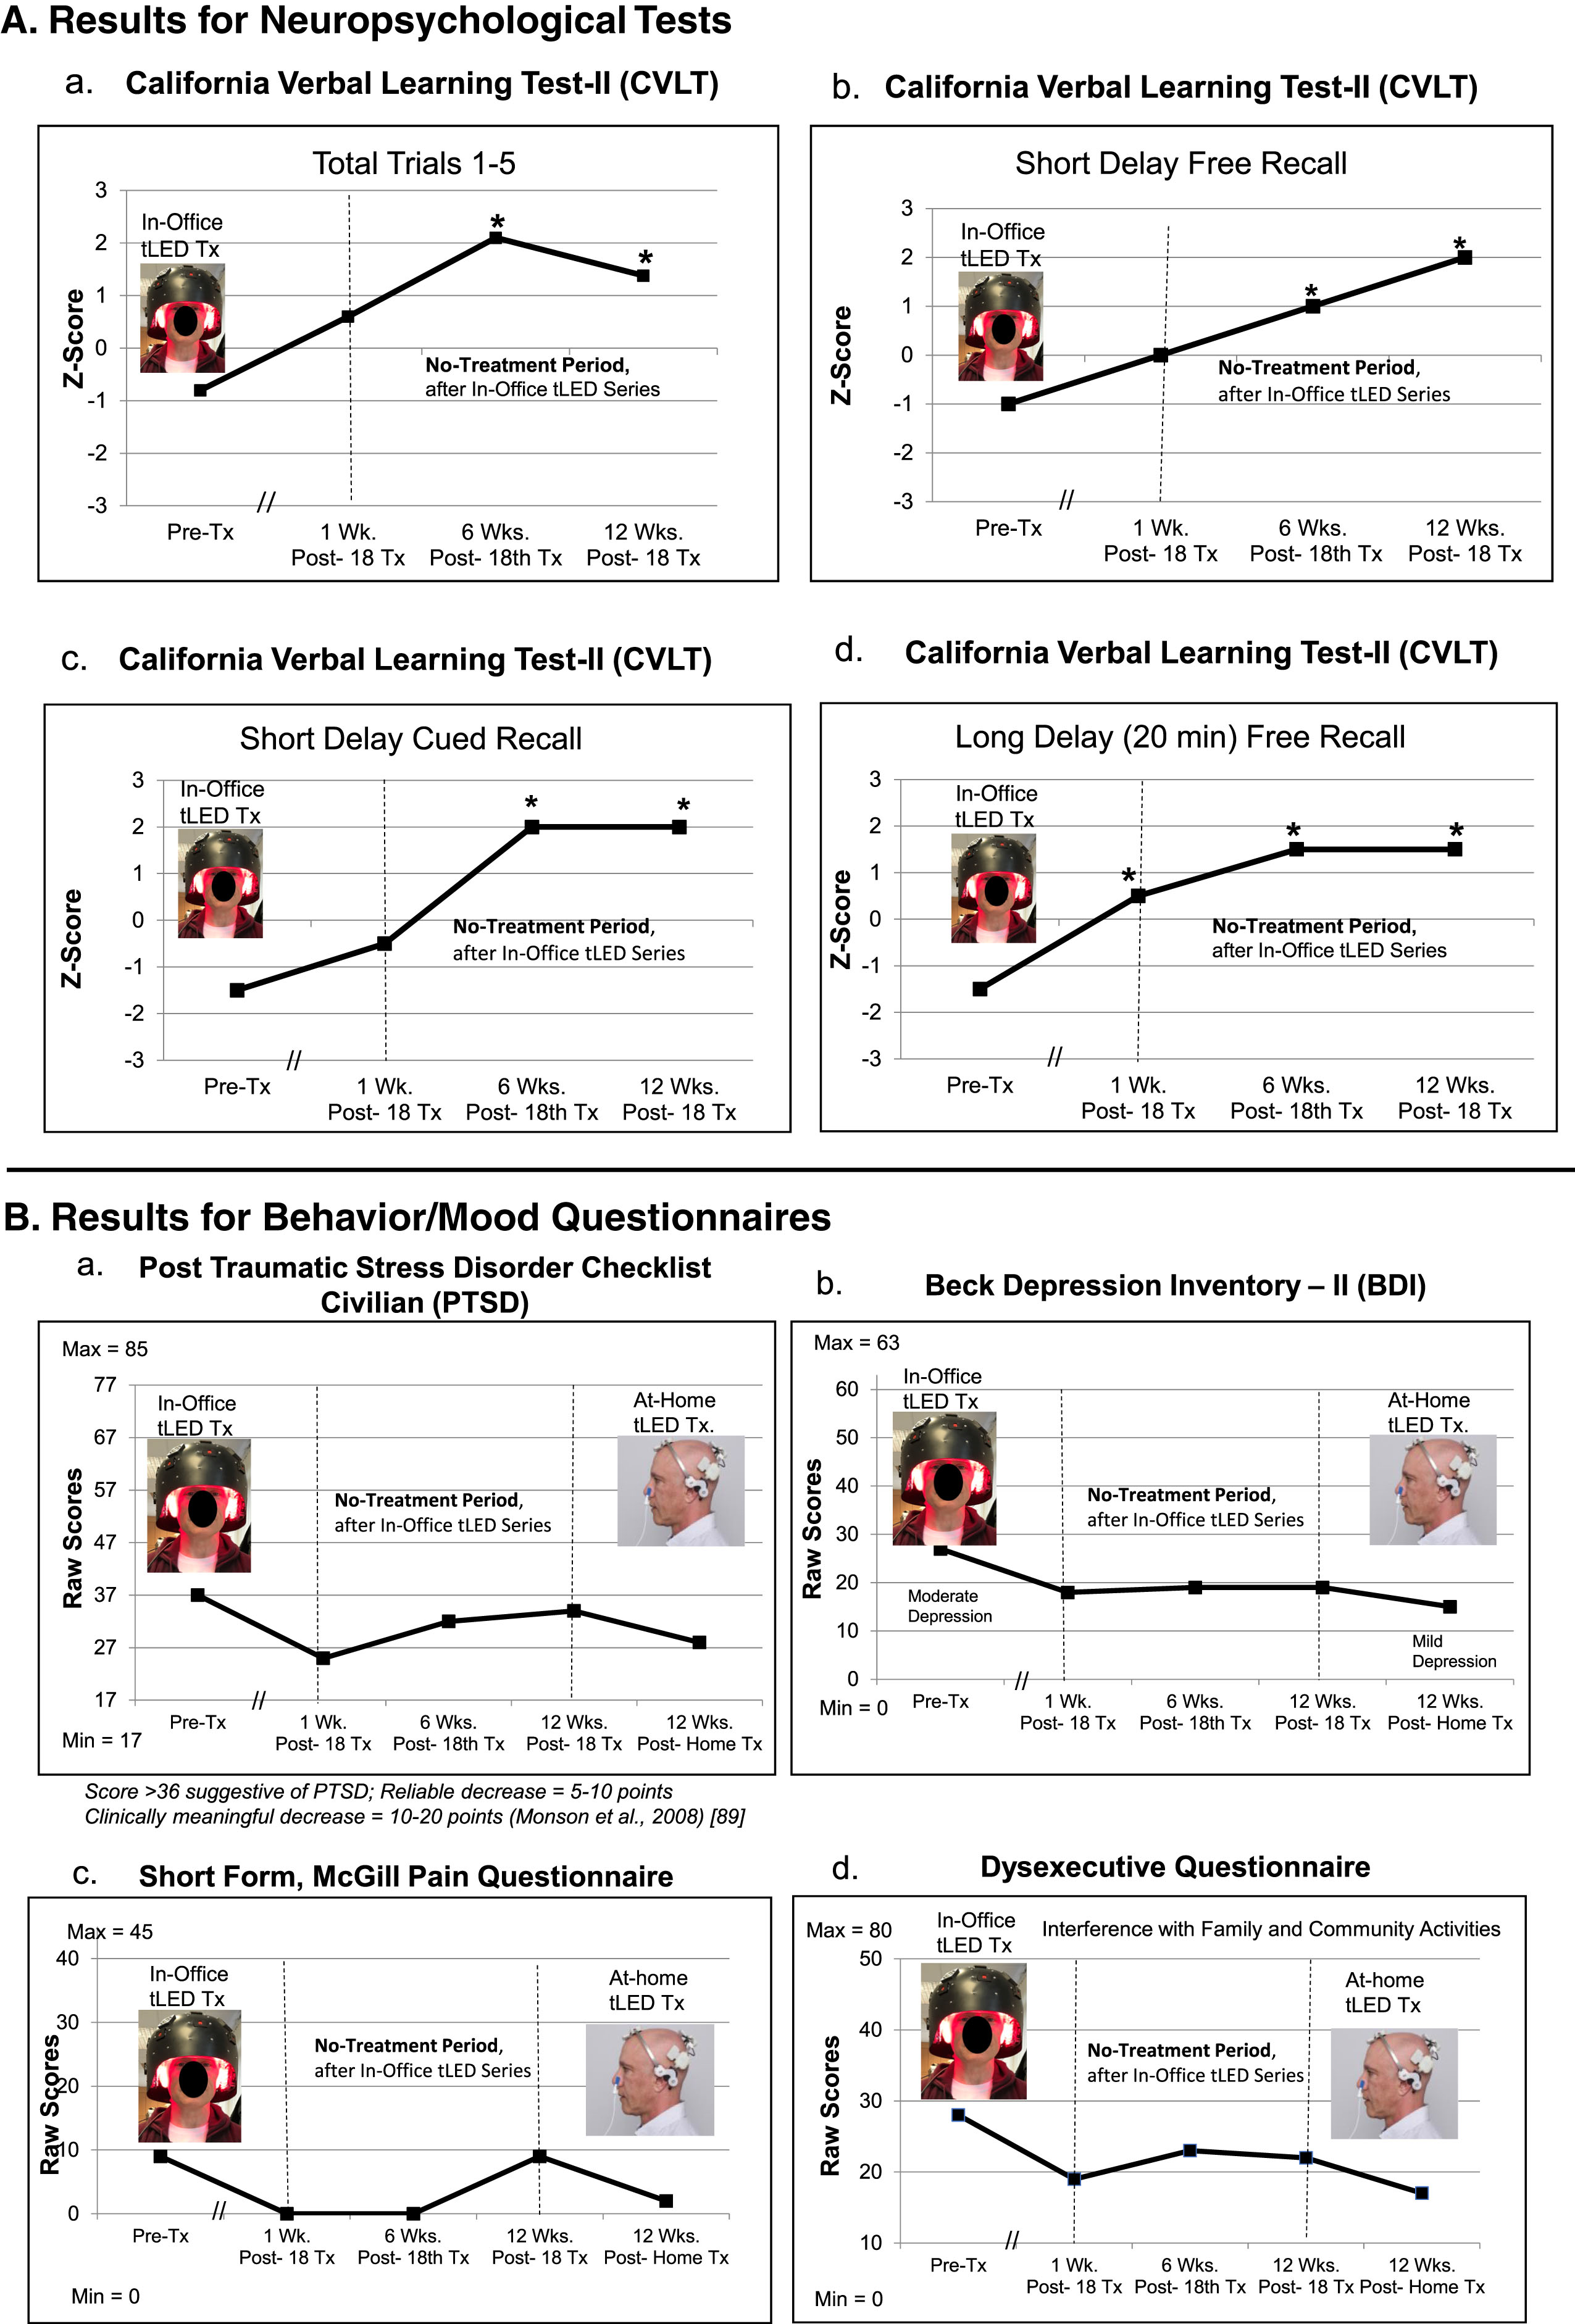 P2, cognitive and behavior/mood results. A) Z-Score graphs for some CVLT subtests after the initial in-office tPBM series (Protocol C). B) Ratings for behavior/mood questionnaires after the initial, in-office series, and after the later, at-home series (Protocol B). Improvements (lower ratings) were present at 1 week and 6 weeks after the in-office series; however, there was some worsening (higher ratings) at 12 weeks on PTSD/PCL-C (a) and pain/SF-MPQ (c). Improved (lower) ratings for PTSD (a) and pain (c) were again present after the 12-week, at-home tPBM series. See Supplementary Tables 4A and 4B. CVLT, California Verbal Learning Test; PTSD/PCL-C, Post-traumatic Stress Disorder Checklist, Civilian; SF-MPQ, Short form, McGill Pain Questionnaire; *p < 0.05.